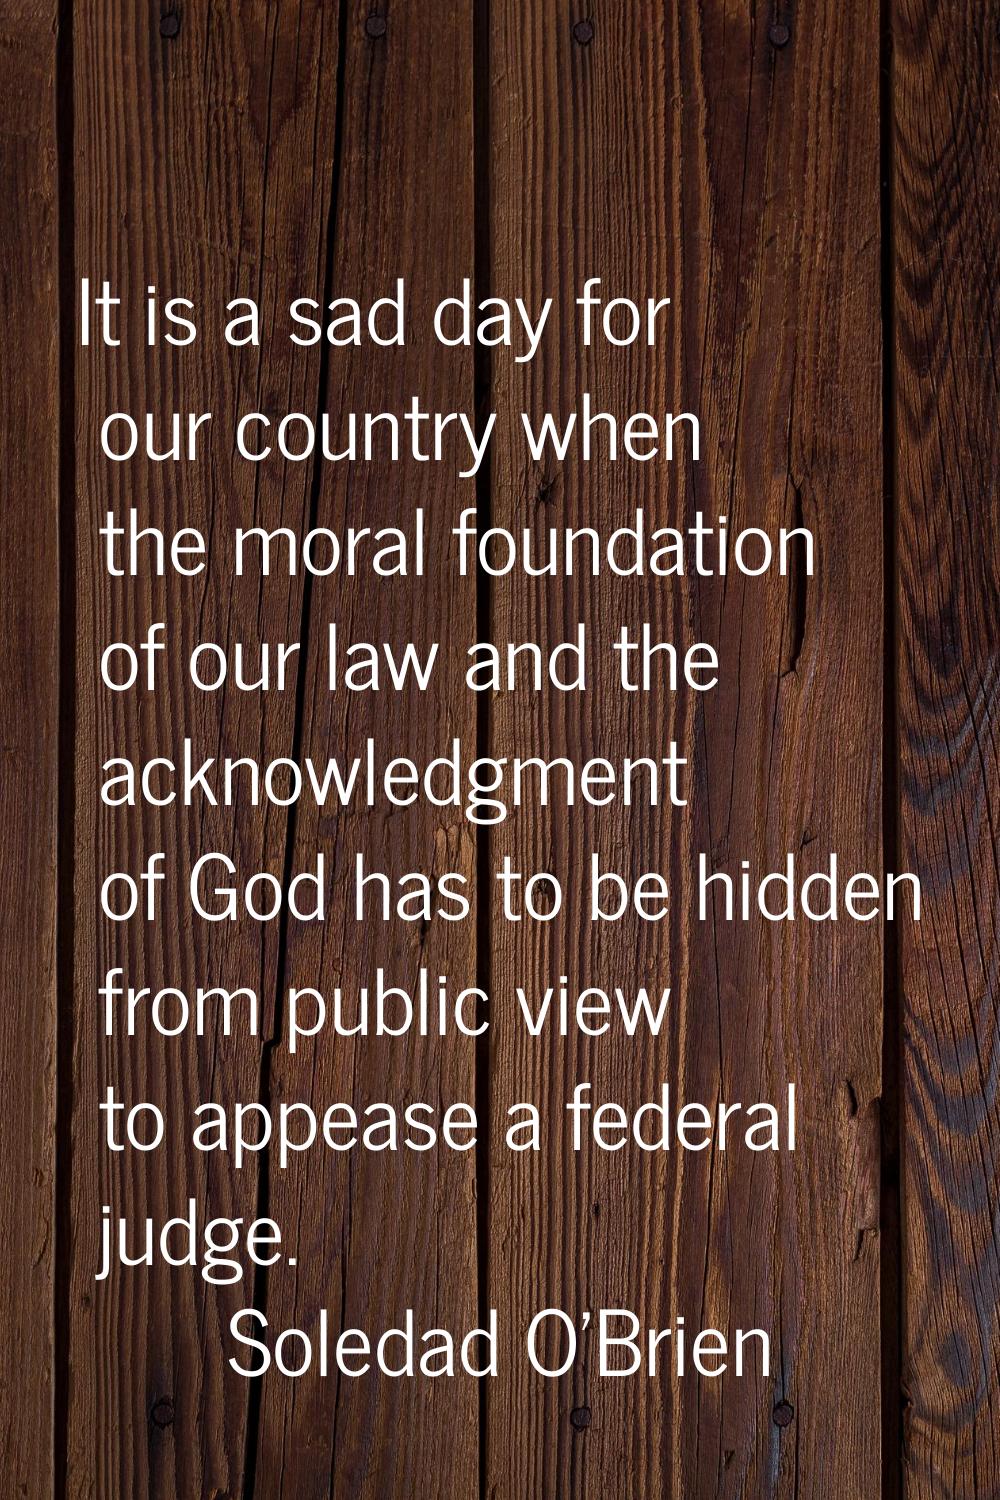 It is a sad day for our country when the moral foundation of our law and the acknowledgment of God 